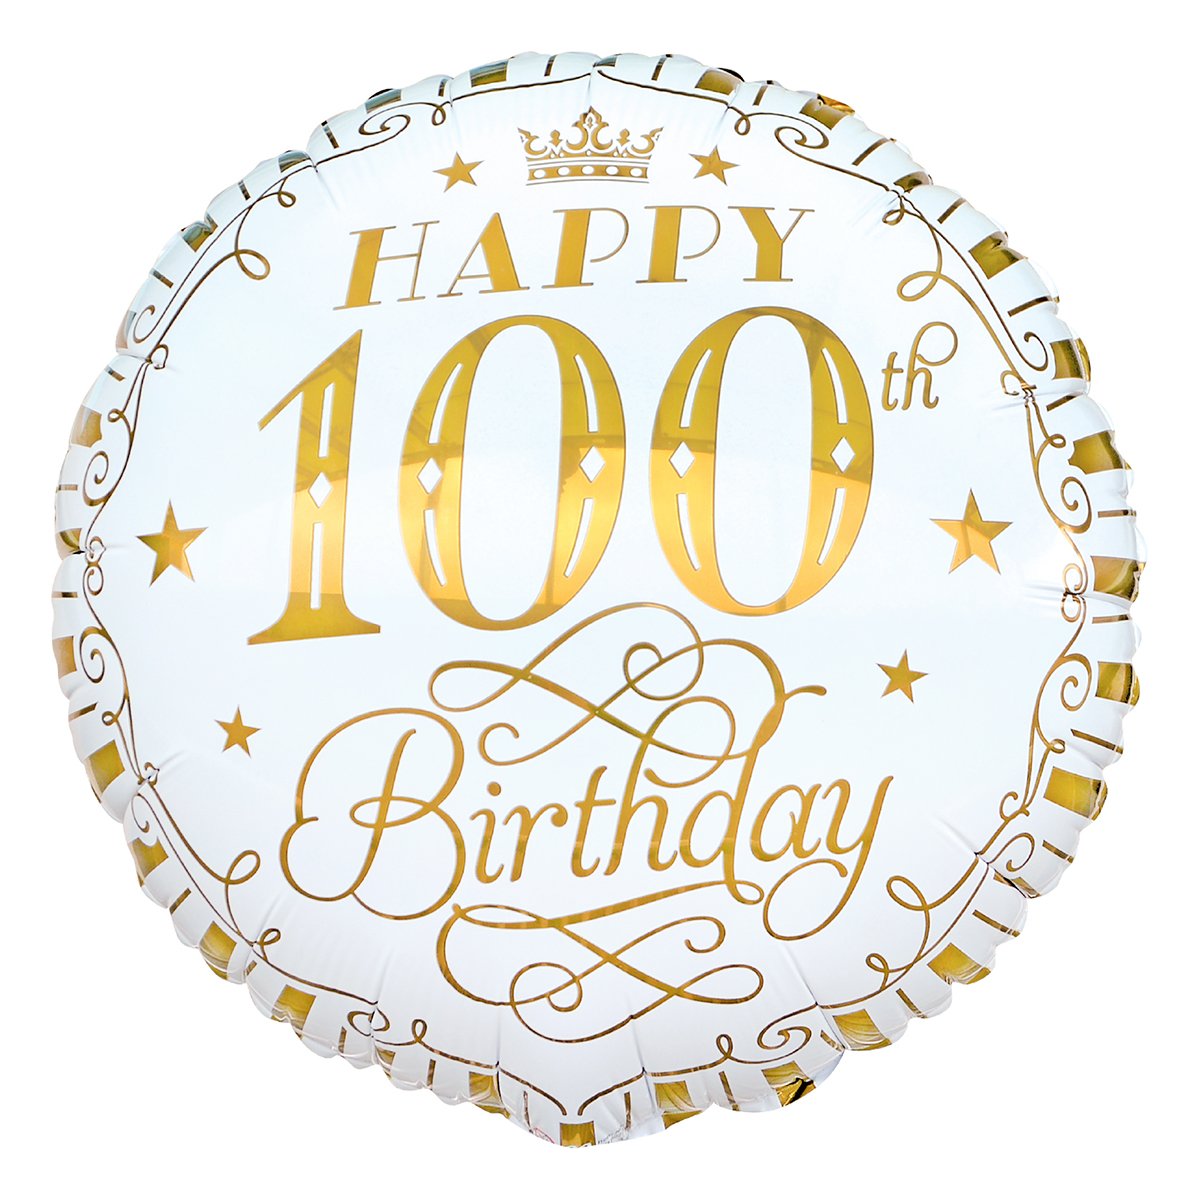 Buy White & Gold 100th Birthday 18-Inch Foil Helium Balloon for GBP 2.99